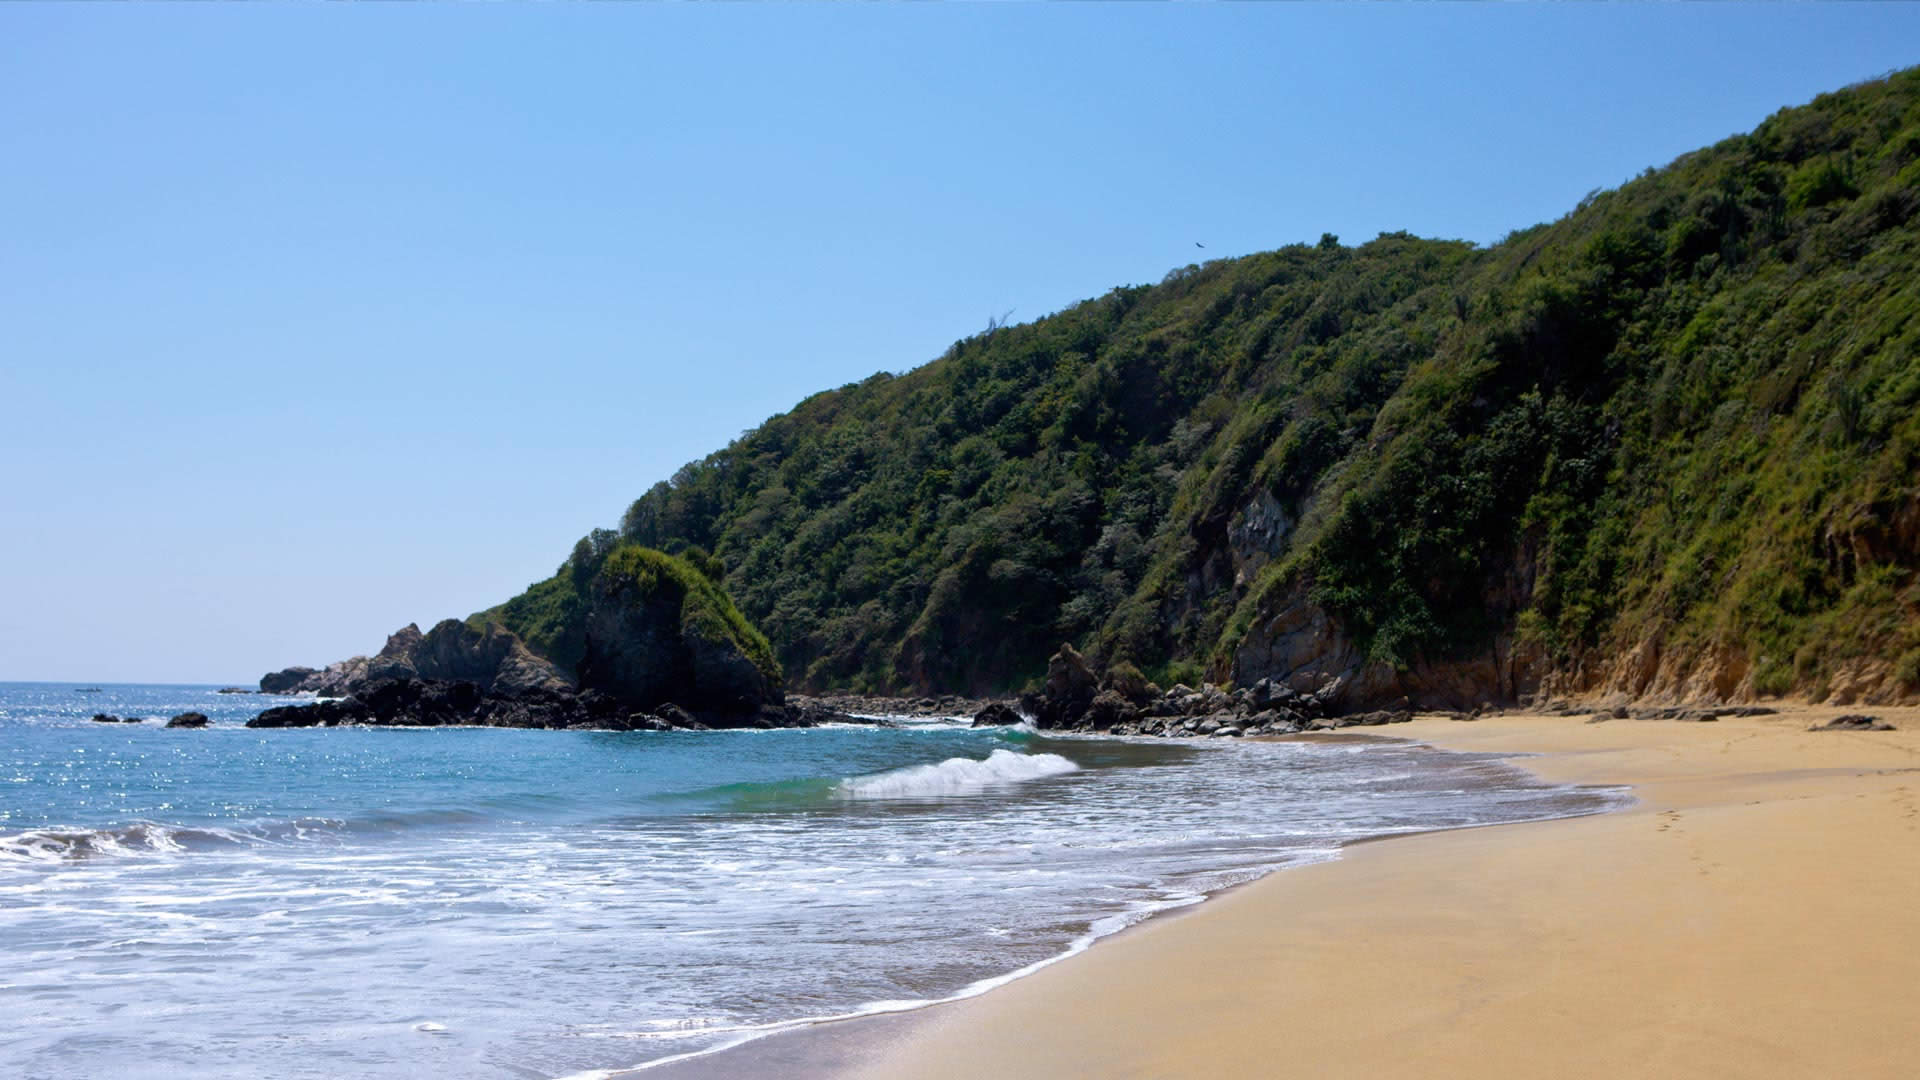 Last Minute Flight + Hotel Deal: Toronto/Ottawa/Montreal to Huatulco, Mexico | $442 CAD including taxes | Air Canada